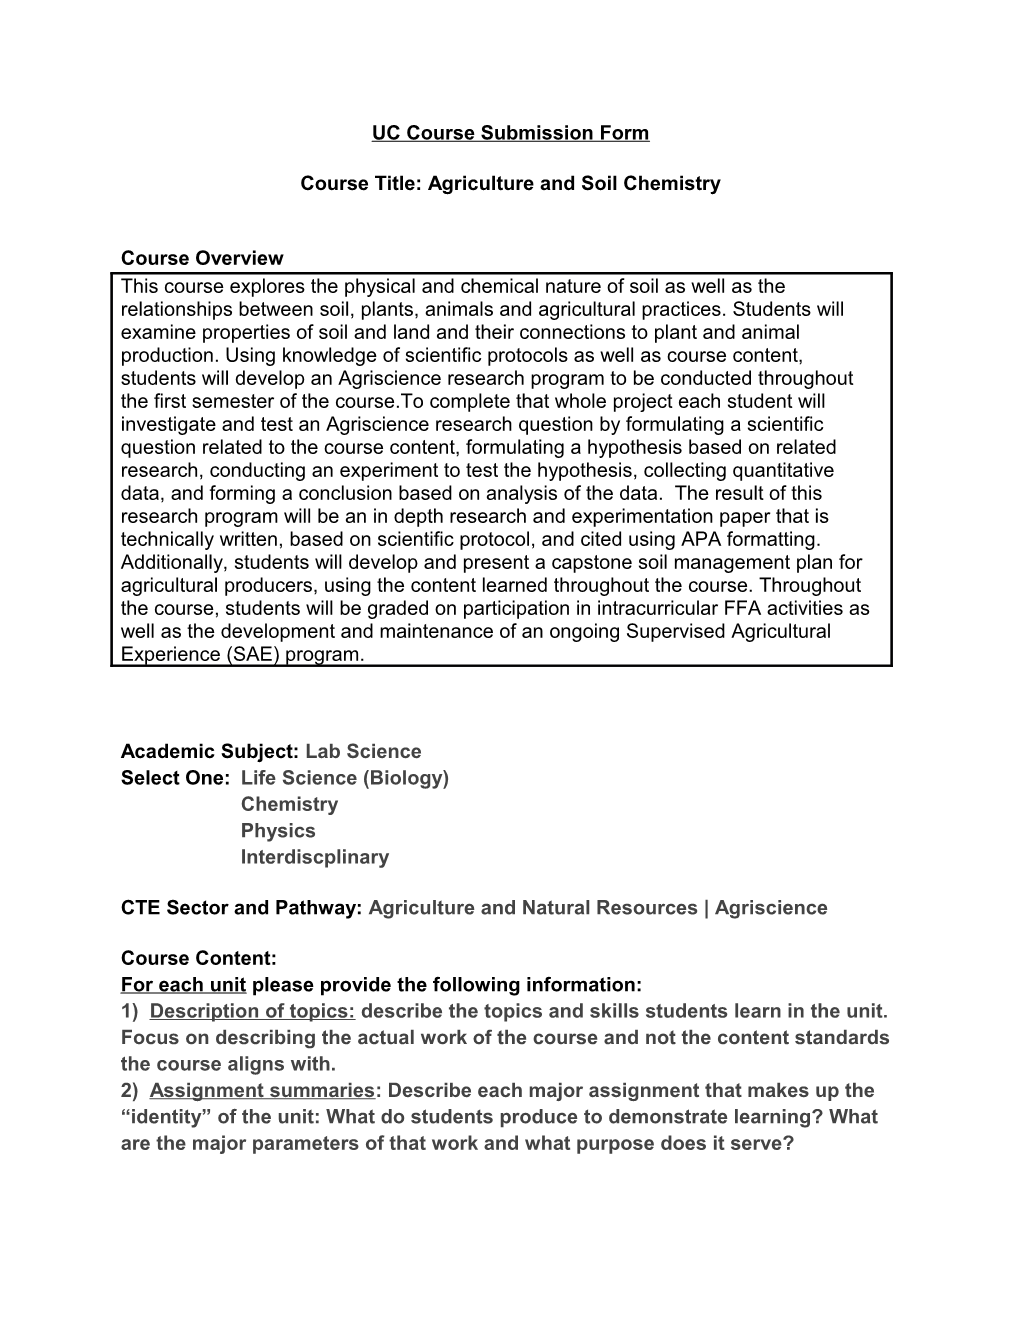 Course Title: Agriculture and Soil Chemistry